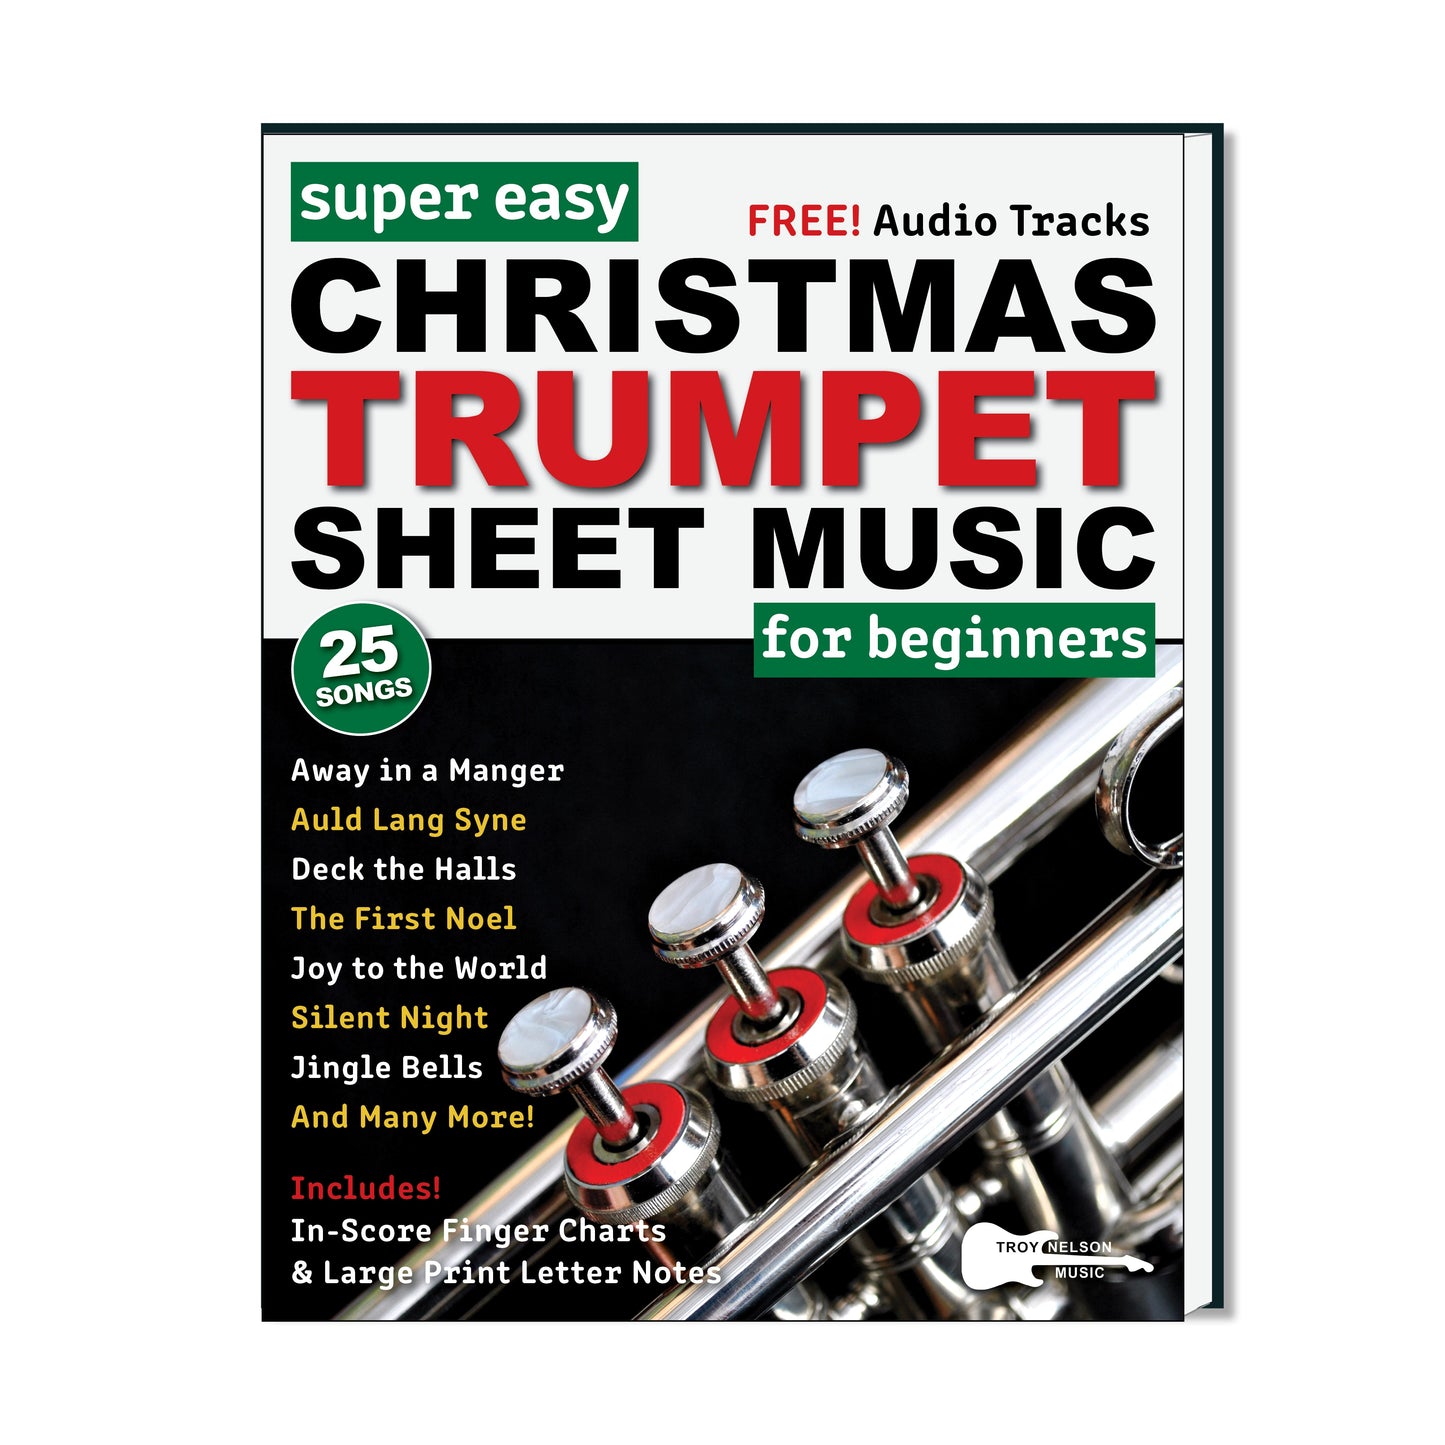 Image of Trumpet with Christmas Decorations on a Book Cover